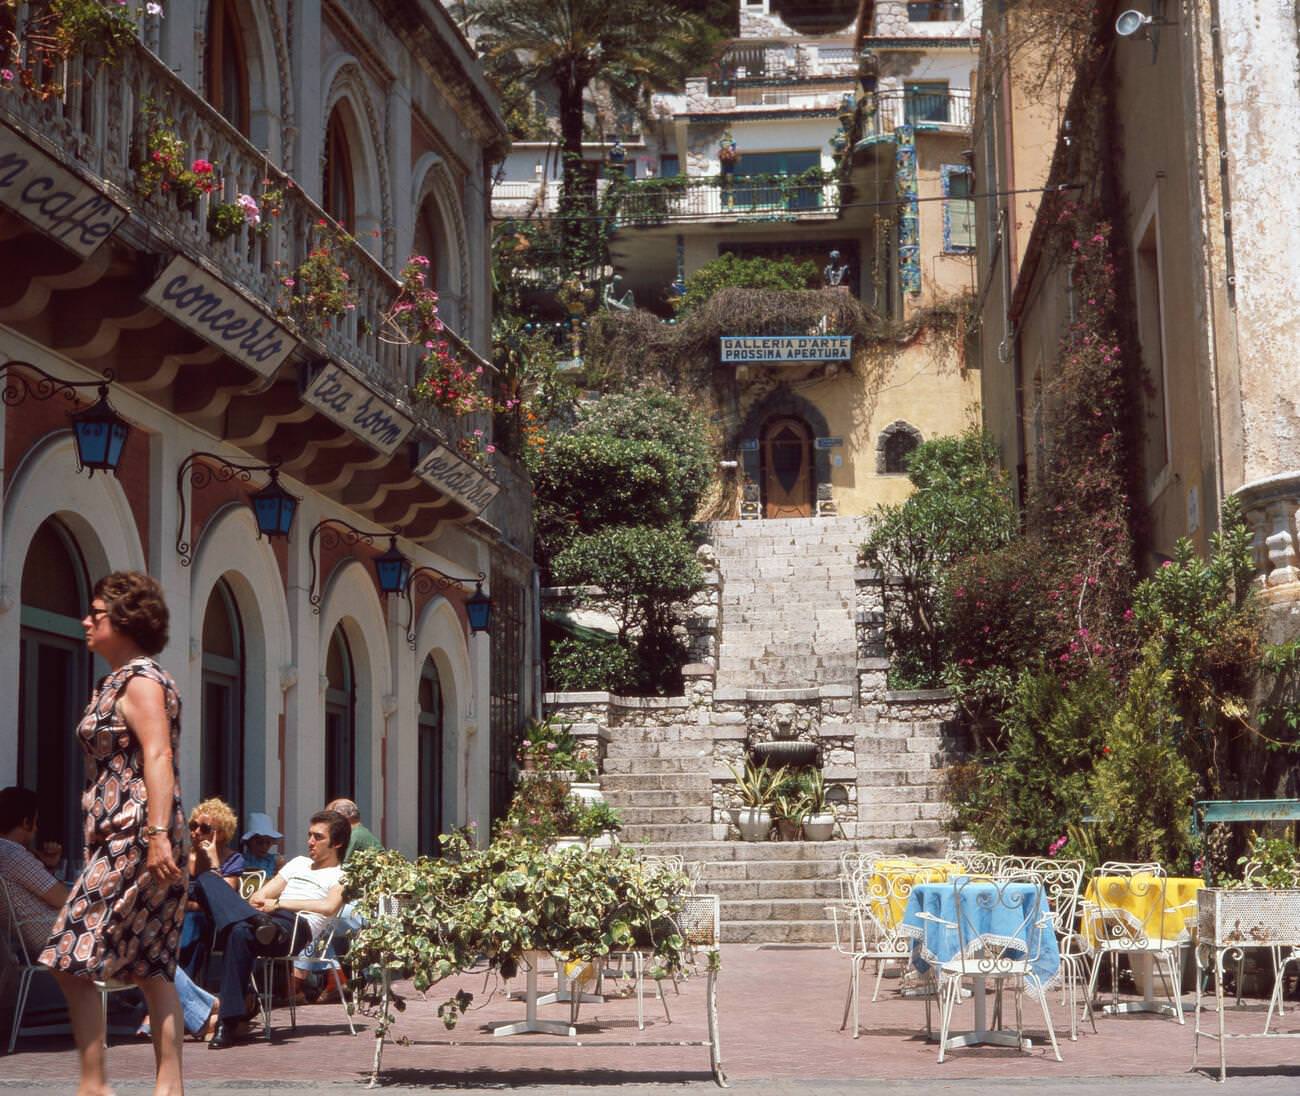 A trip to Taormina, Sicily, in the 1970s.